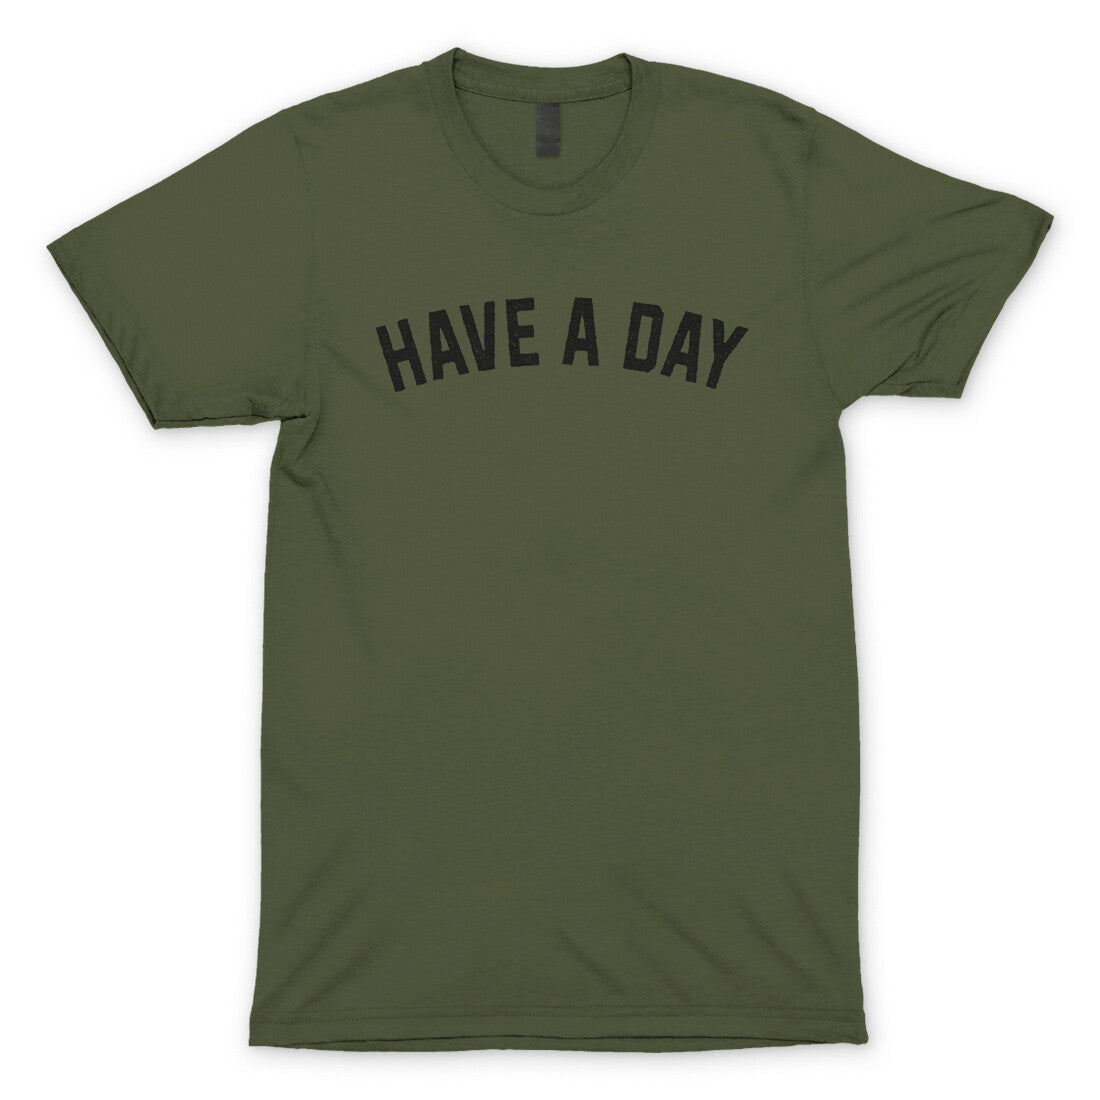 Have a Day in Military Green Color